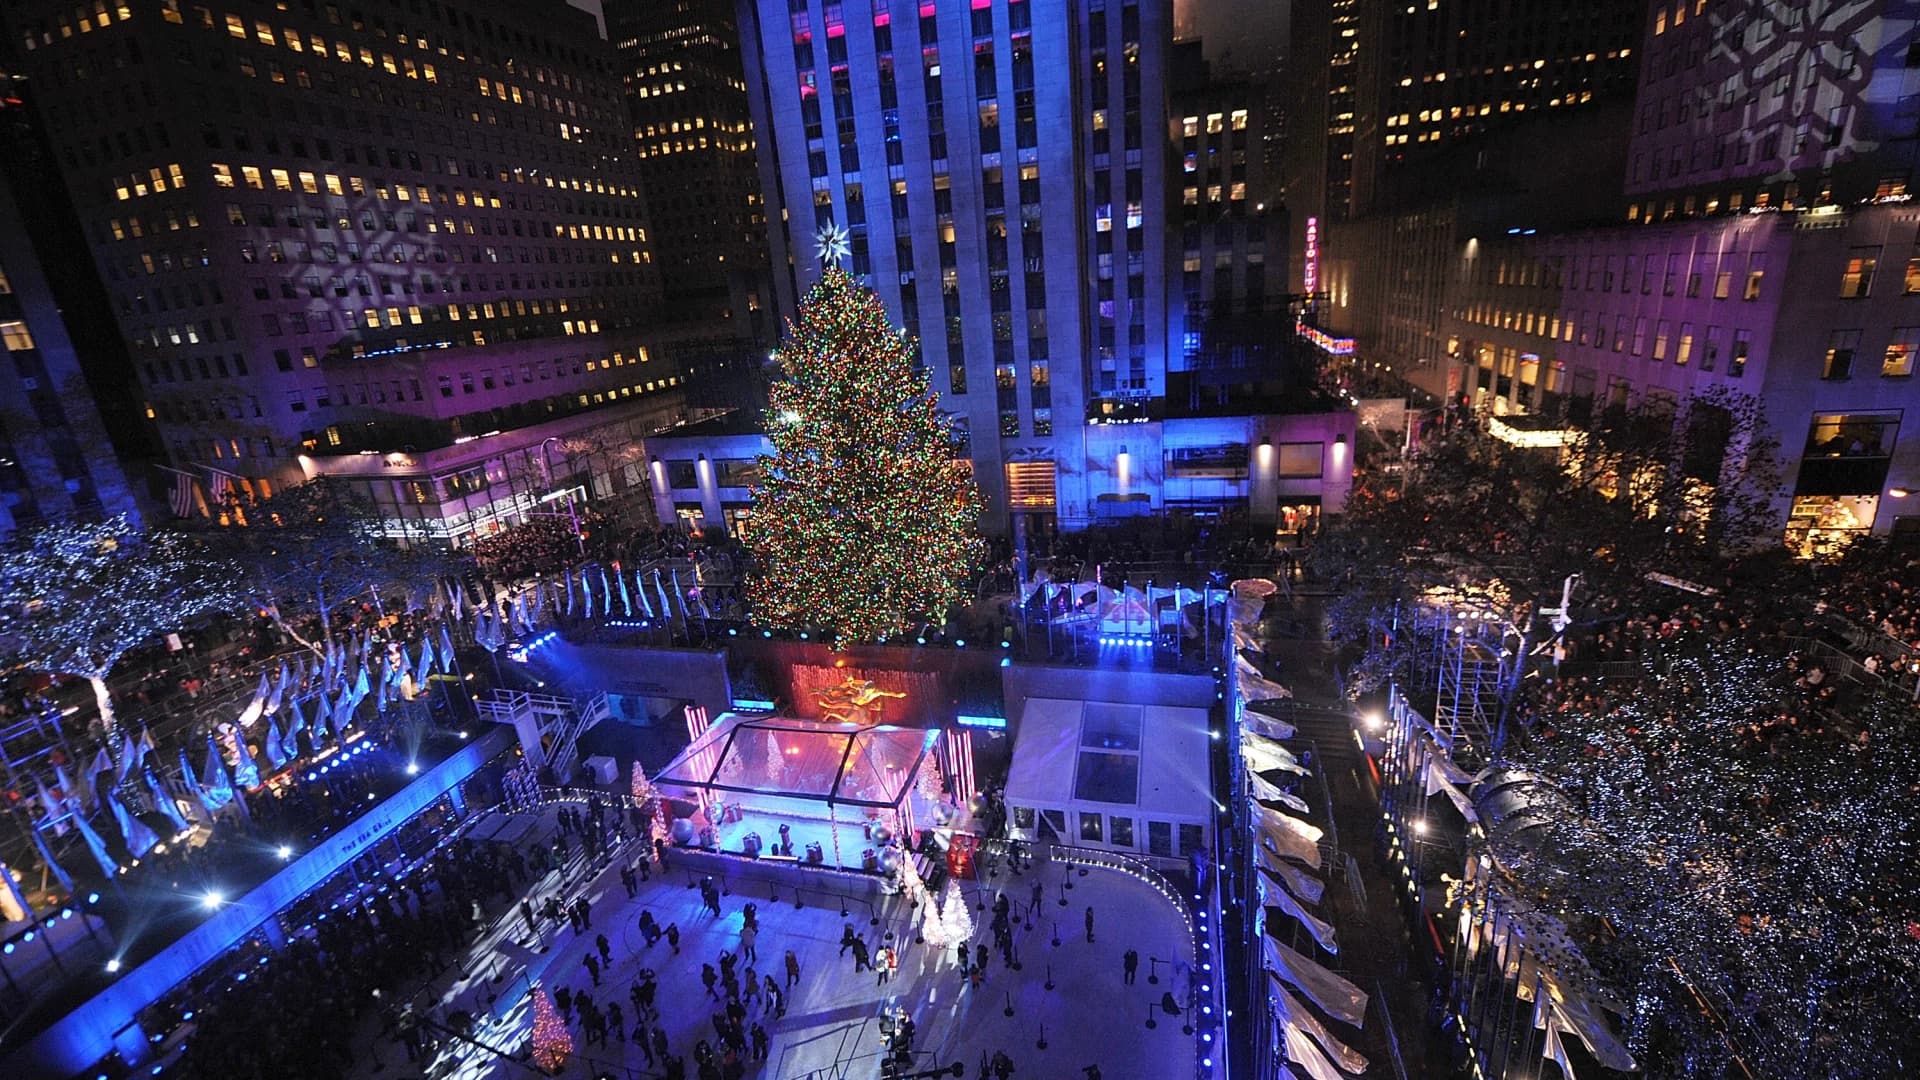 Check out the Christmas tree, or visit a holiday shop! Ways to celebrate the holidays in NYC